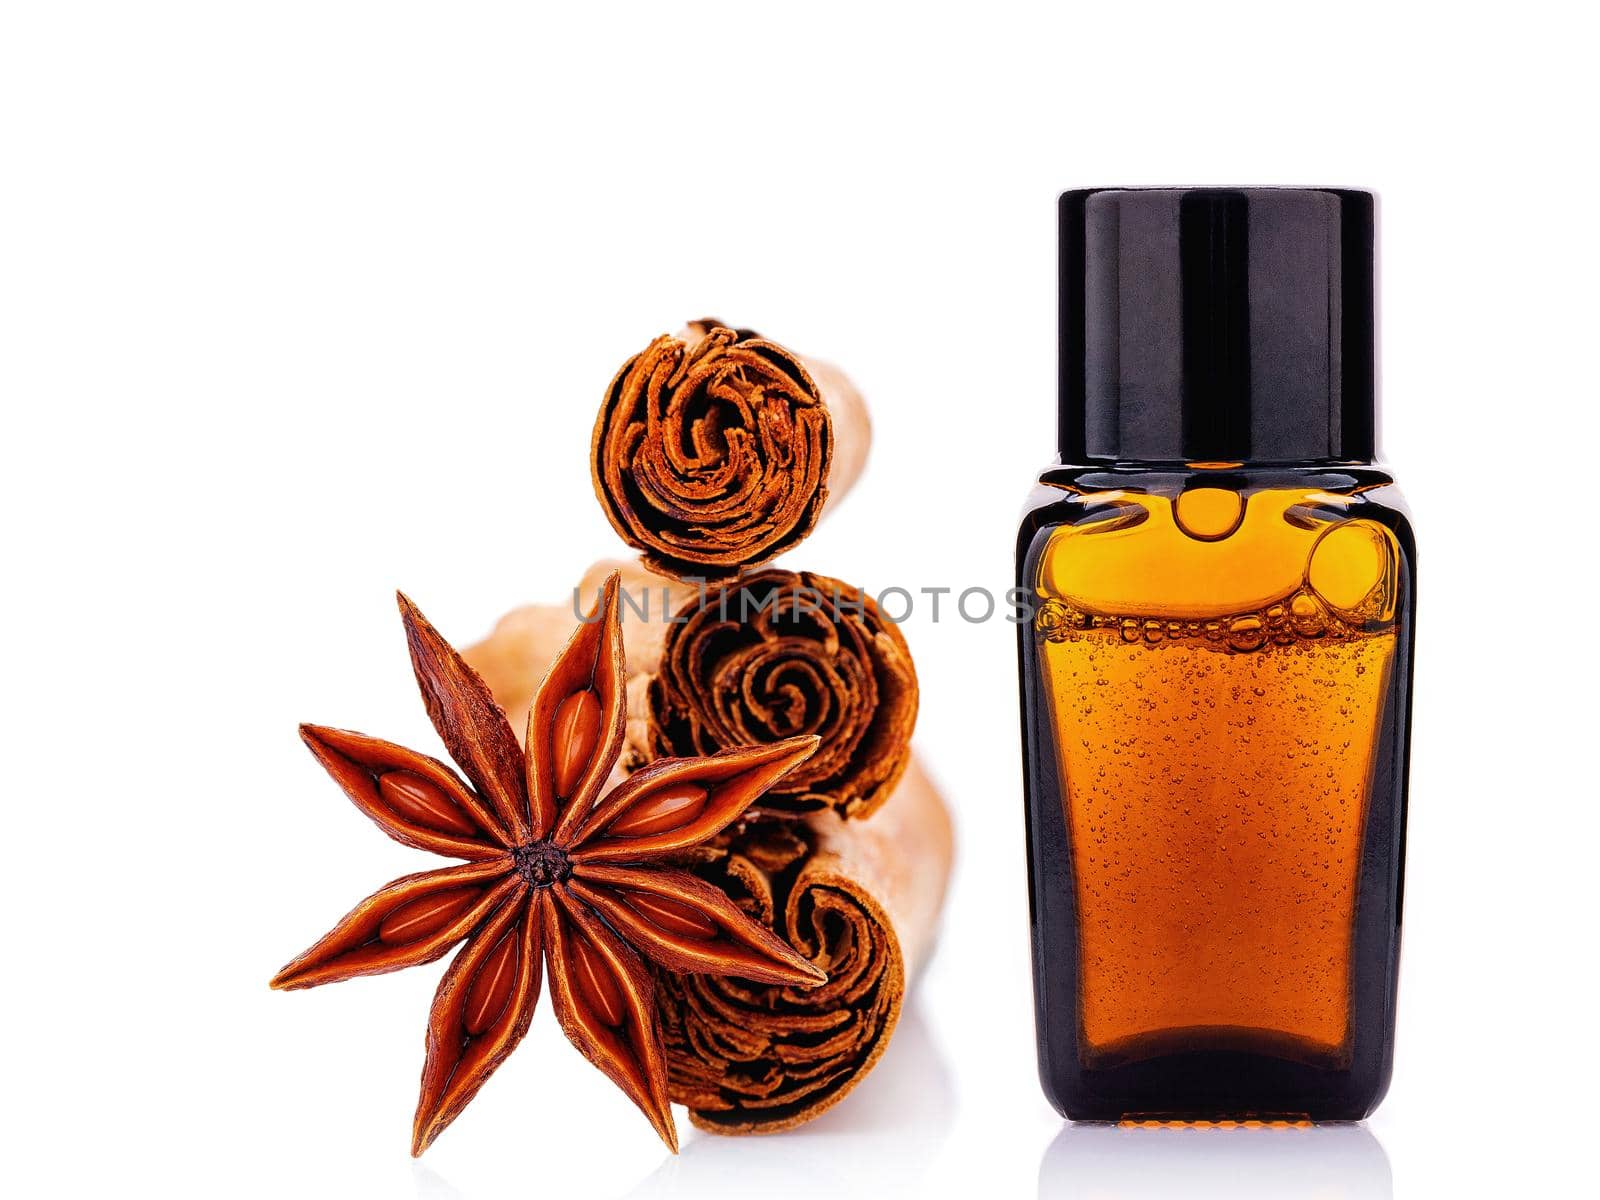 Cinnamon essential oil bottle with Ceylon cinnamon sticks and anise star isolated on white background .